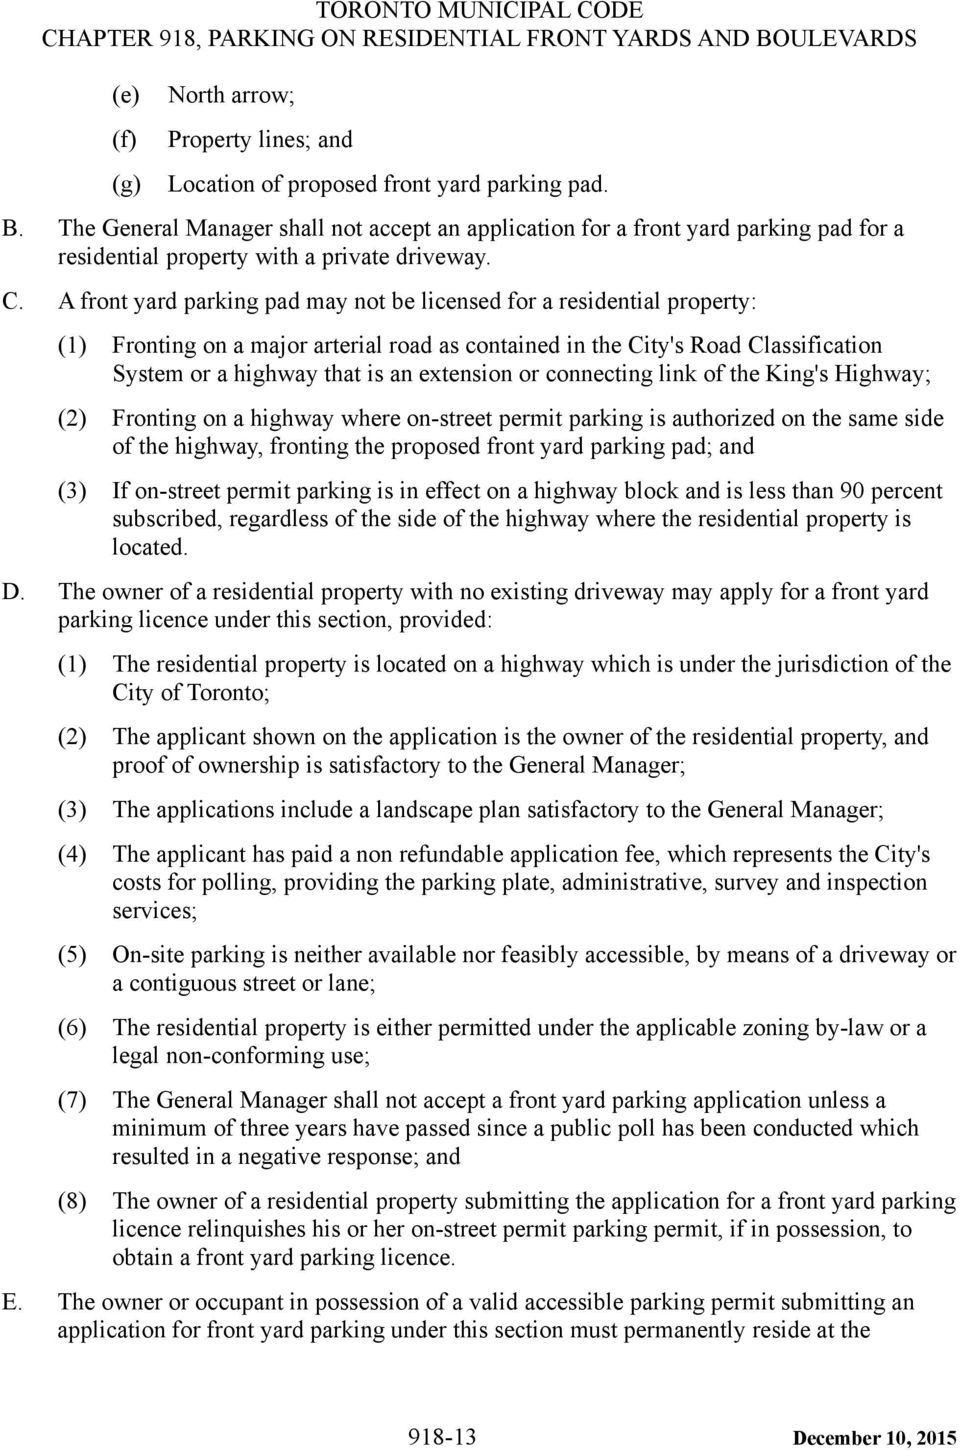 A front yard parking pad may not be licensed for a residential property: (1) Fronting on a major arterial road as contained in the City's Road Classification System or a highway that is an extension